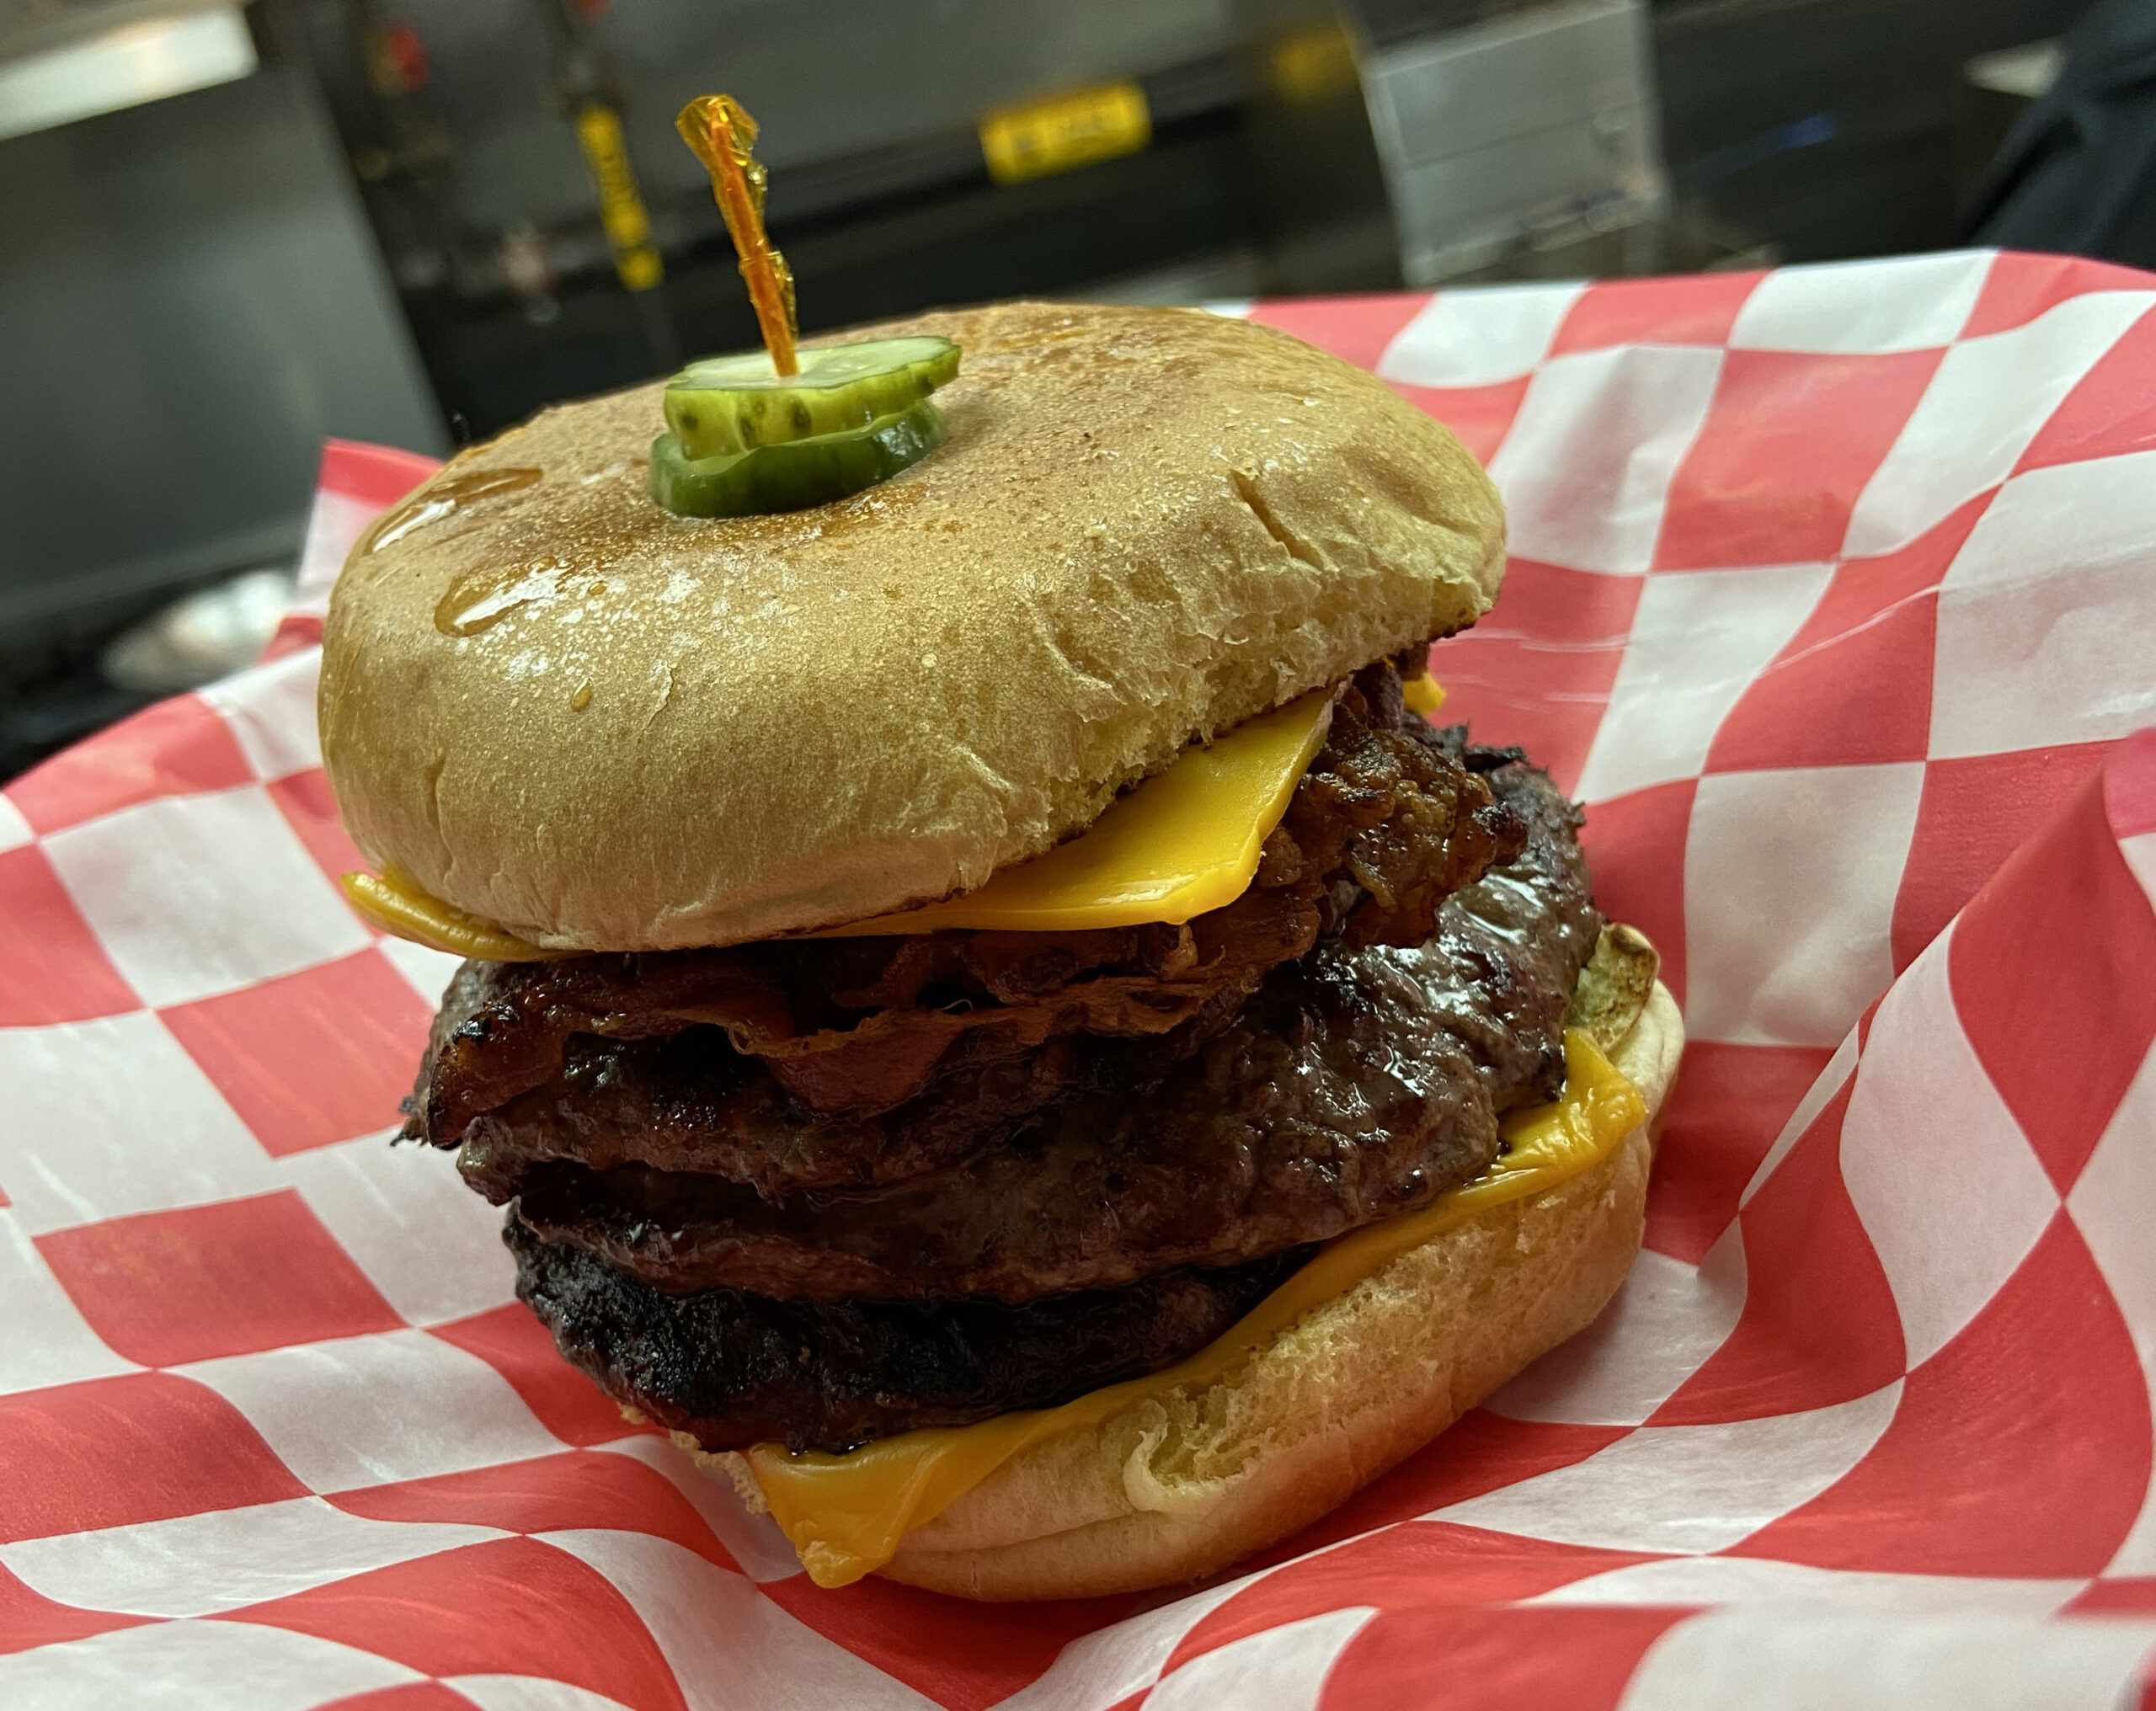 The Jucy Lucy Burger